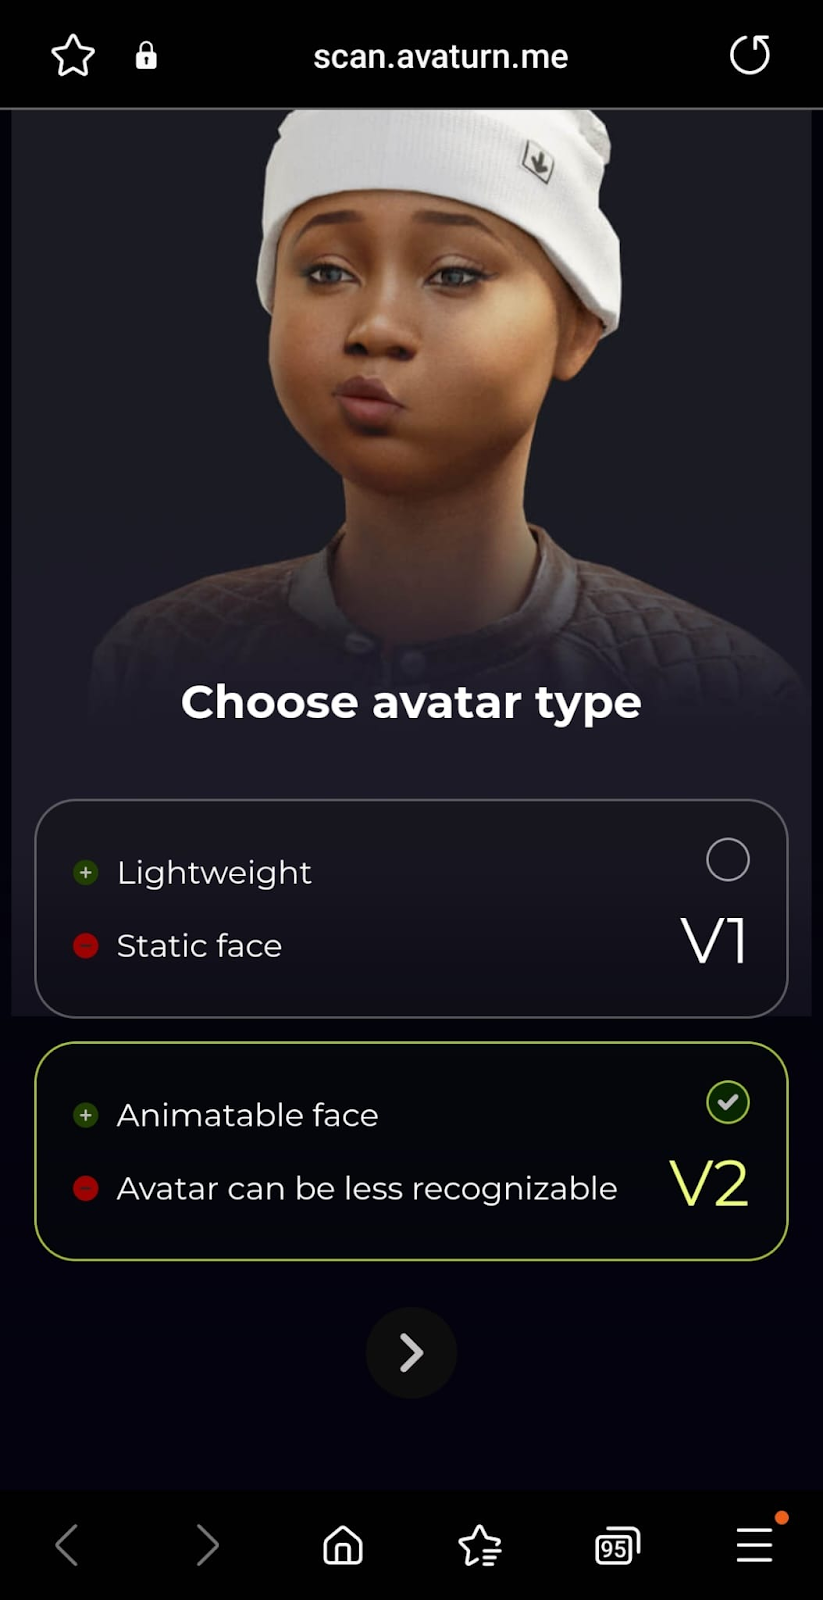 The screen where users are able to select their avatar type either lightweight and animatable face. 